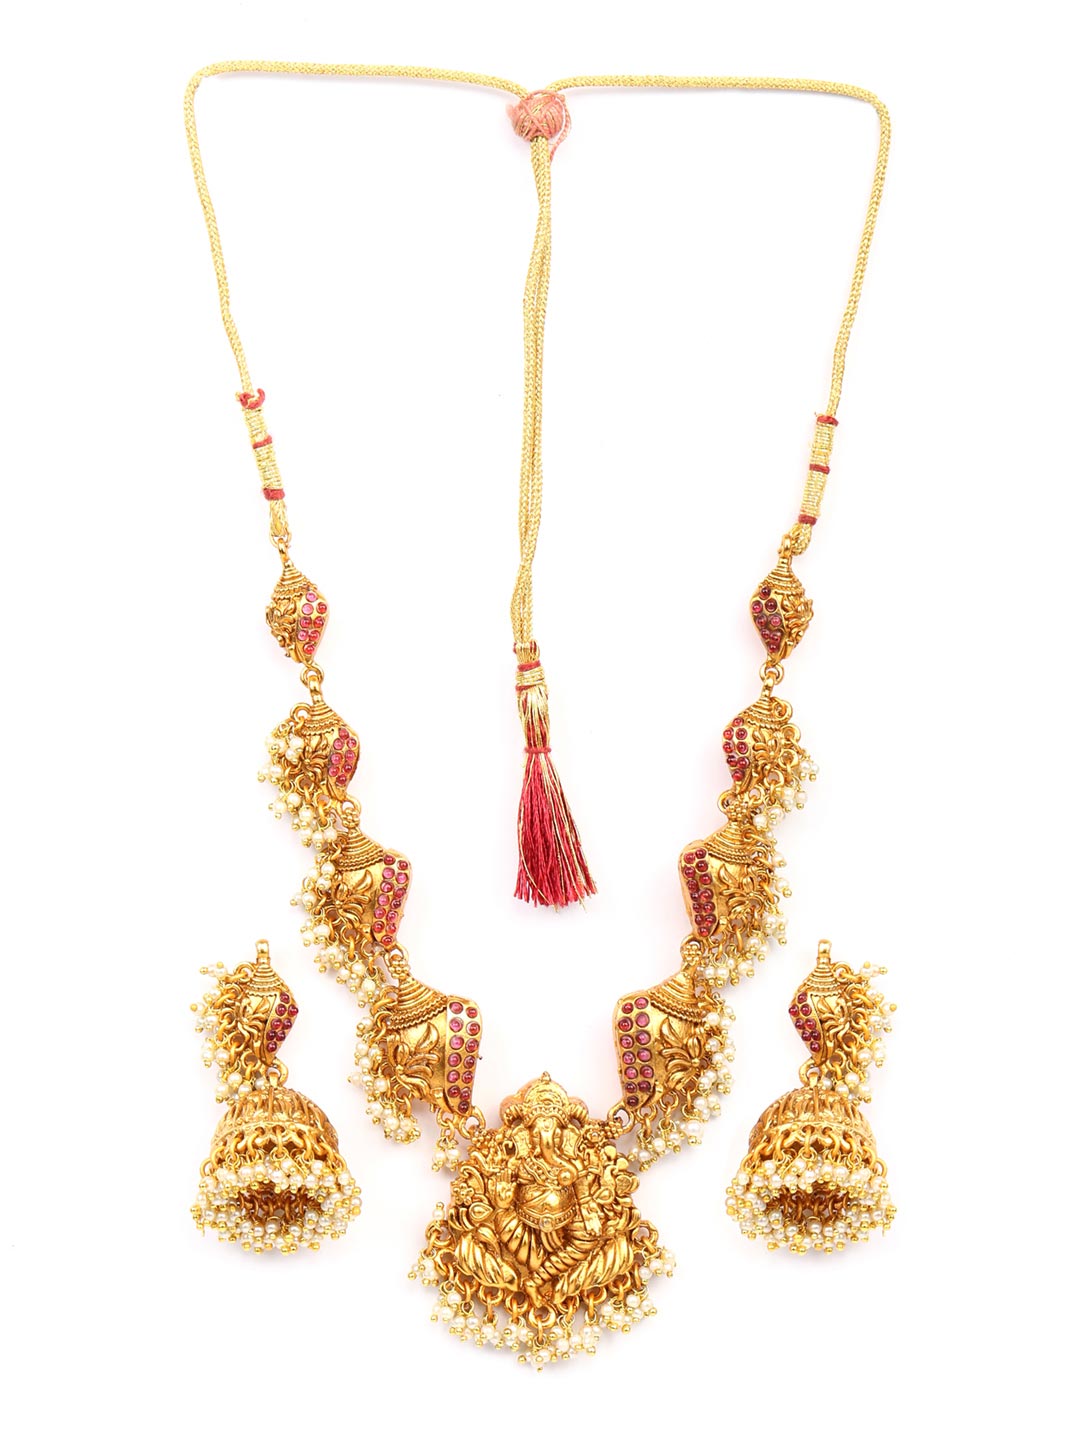 Beads Ruby Gold Plated God Ganesh Temple Jewellery Set